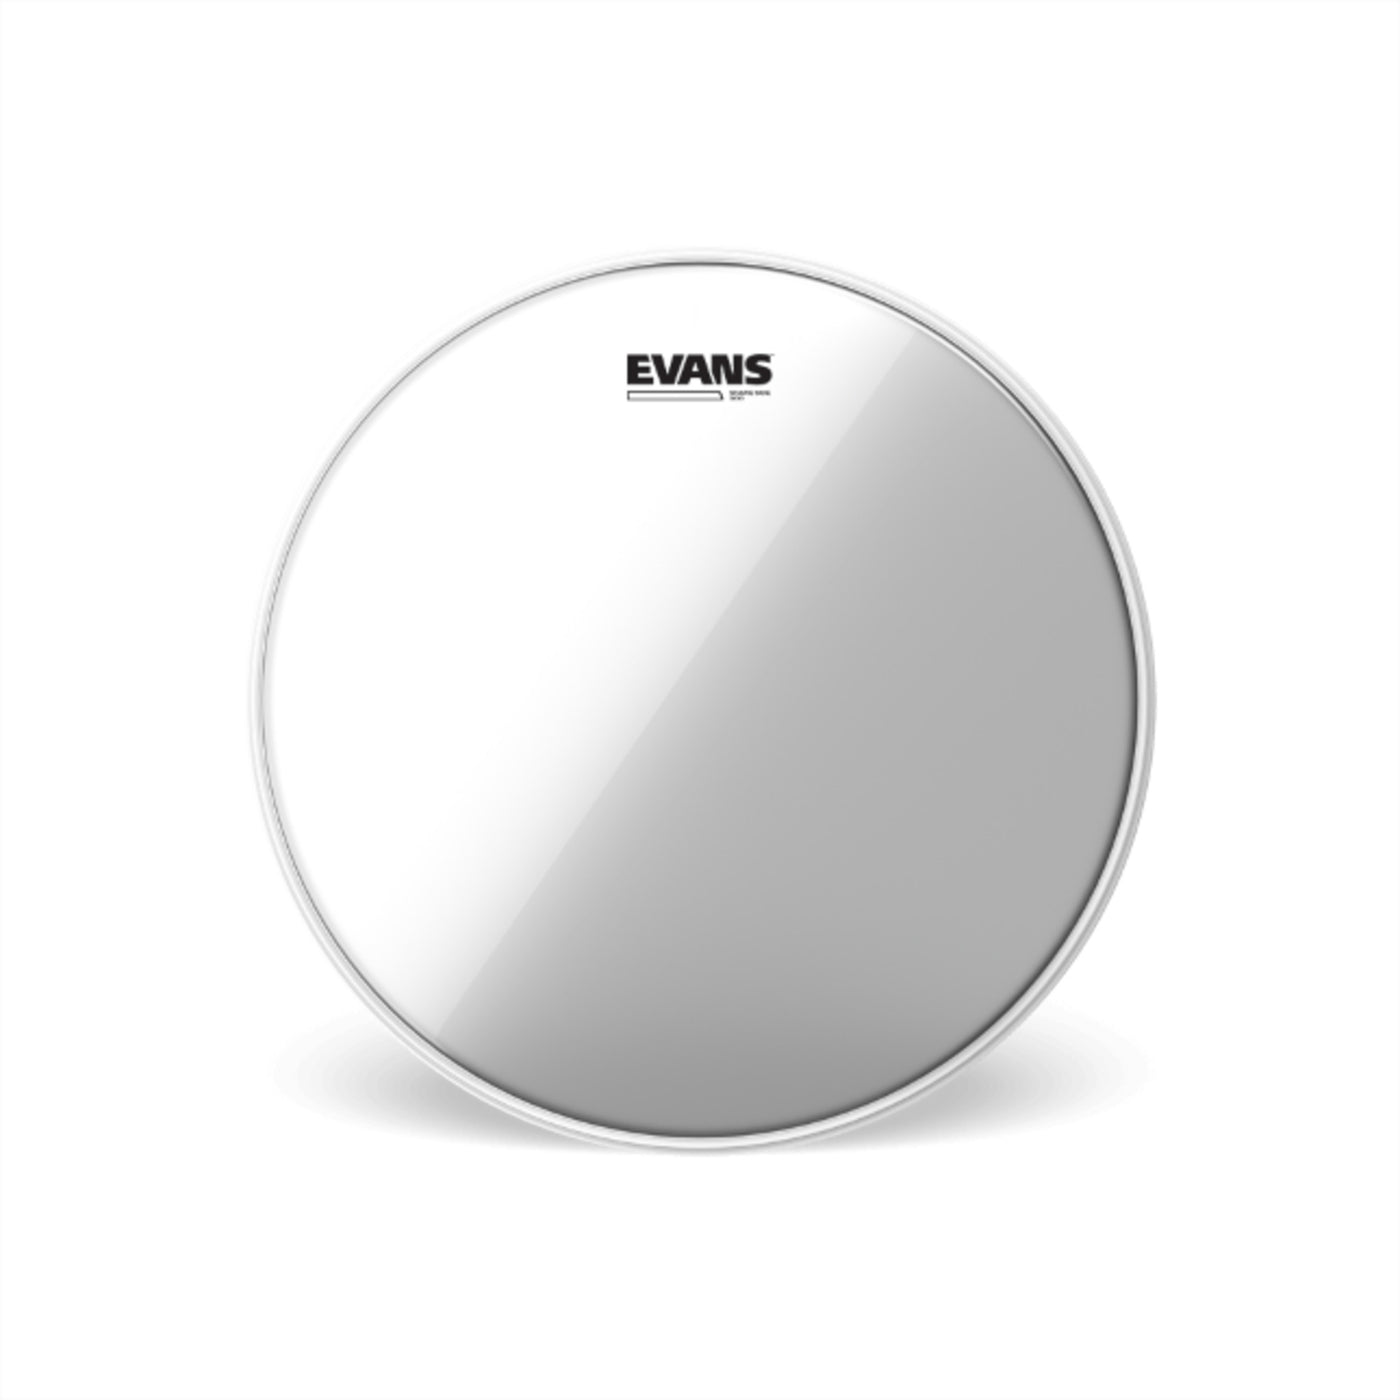 Evans Clear 300 Snare Side Drum Head, 12-Inch (S12H30)